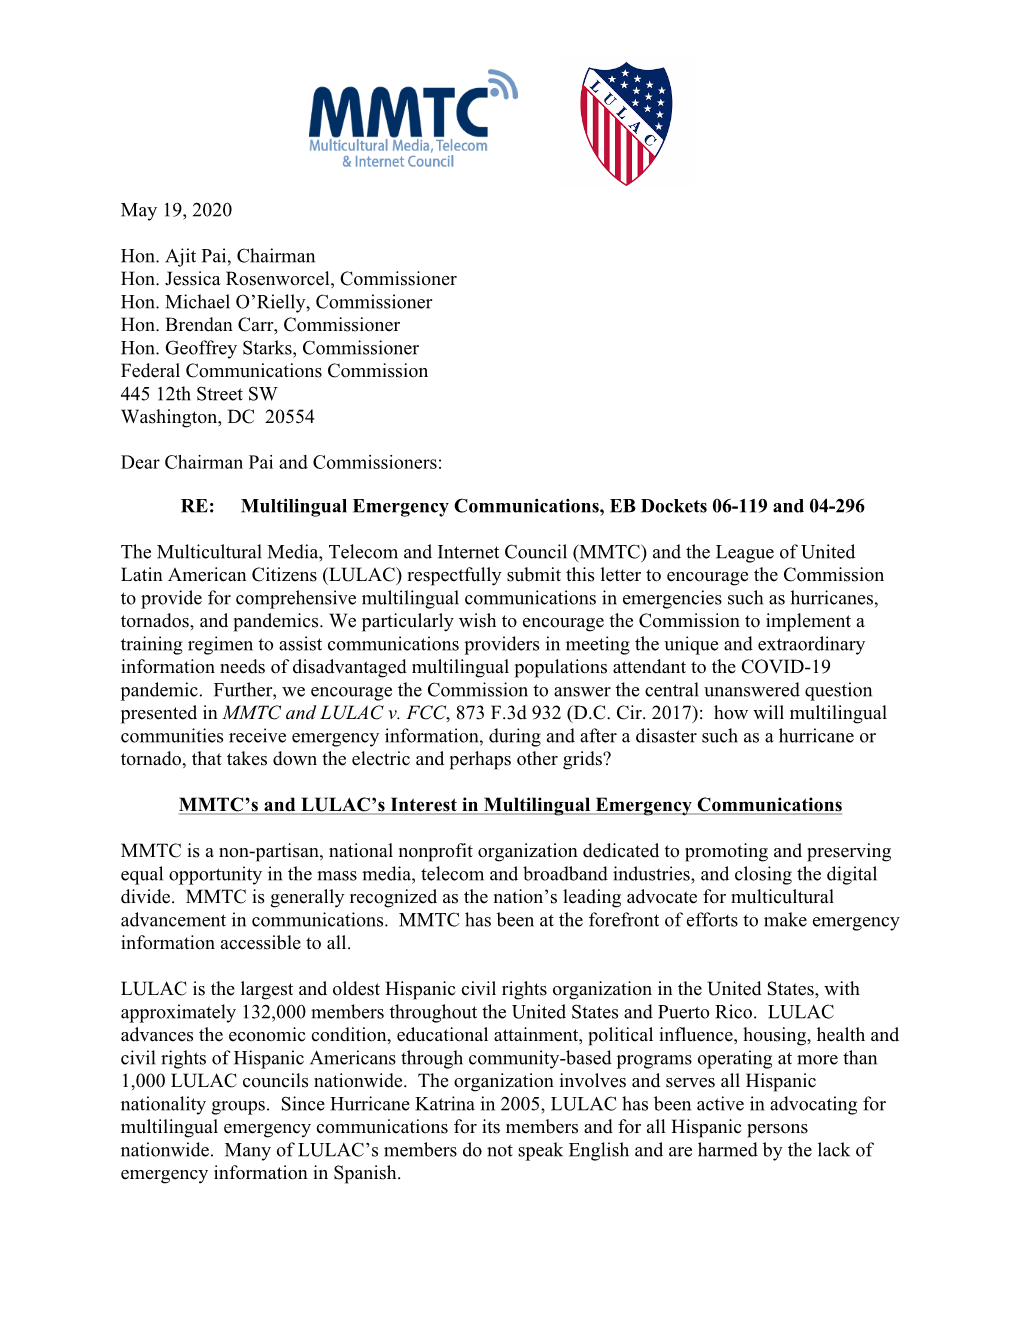 MMTC-LULAC Multilingual Emergency Communications Letter